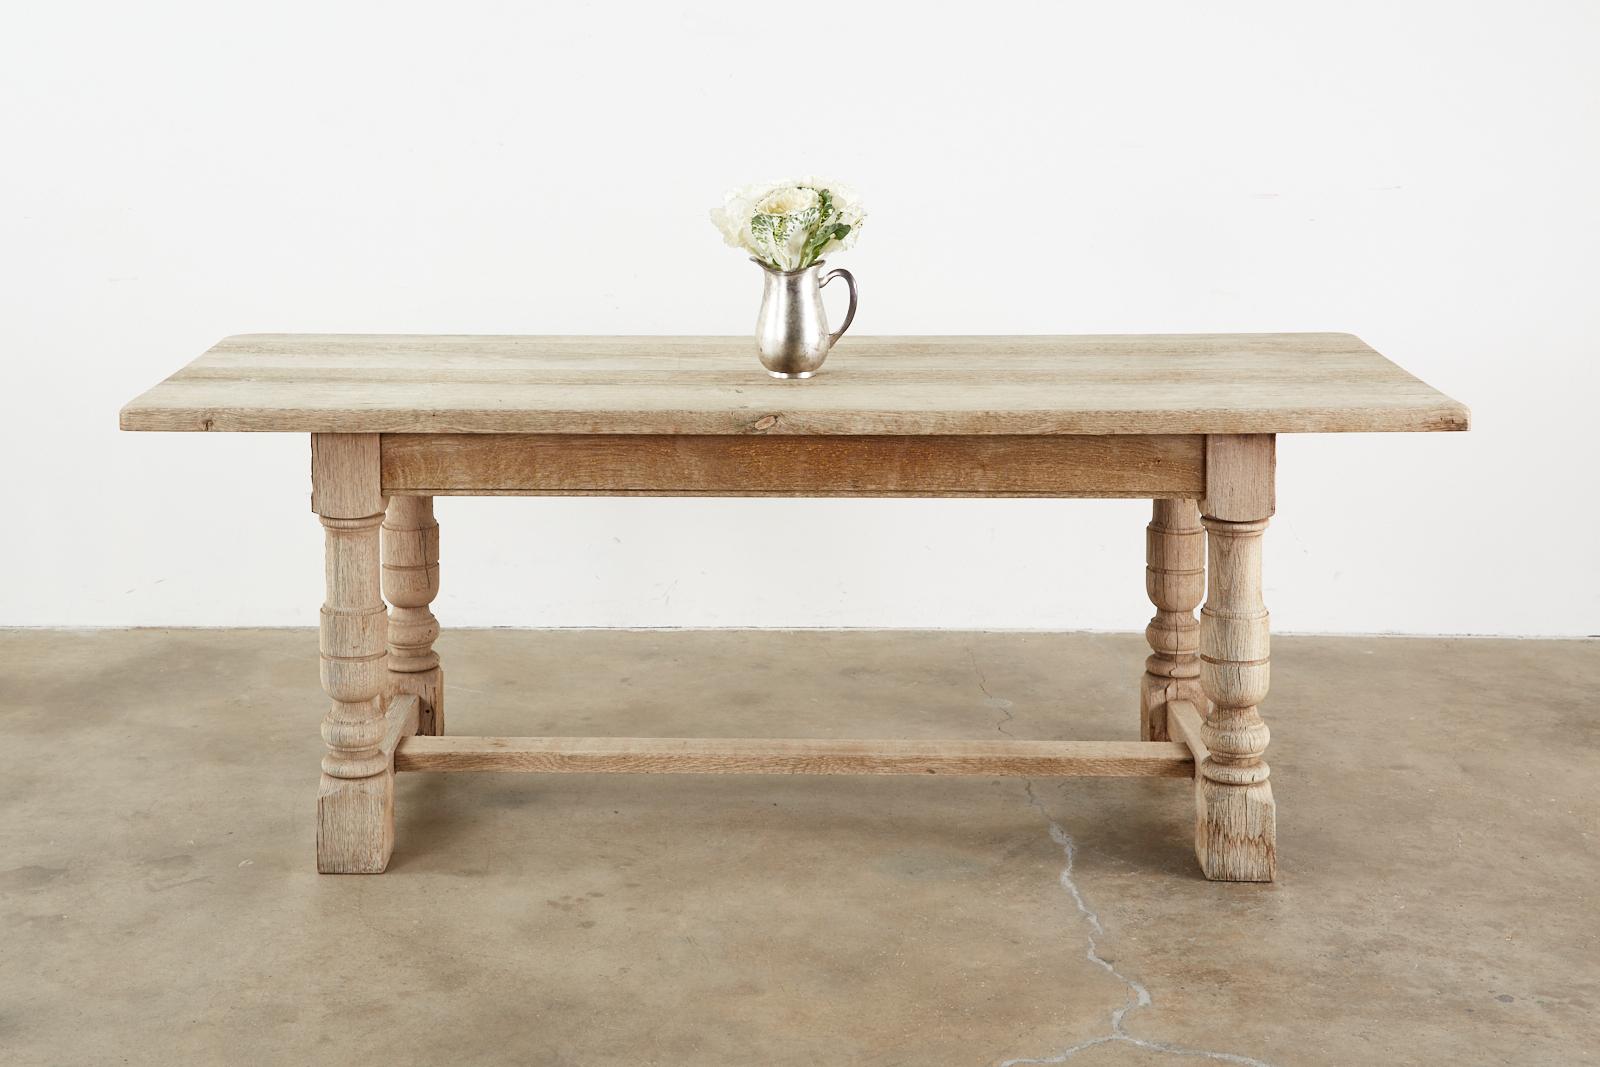 Rustic country French farmhouse dining table featuring a bleached oak distressed finish with an aged patina. Made in a grand trestle style with 1.5 inch thick plank top and thick, chunky turned legs ending with block feet. The legs are conjoined by